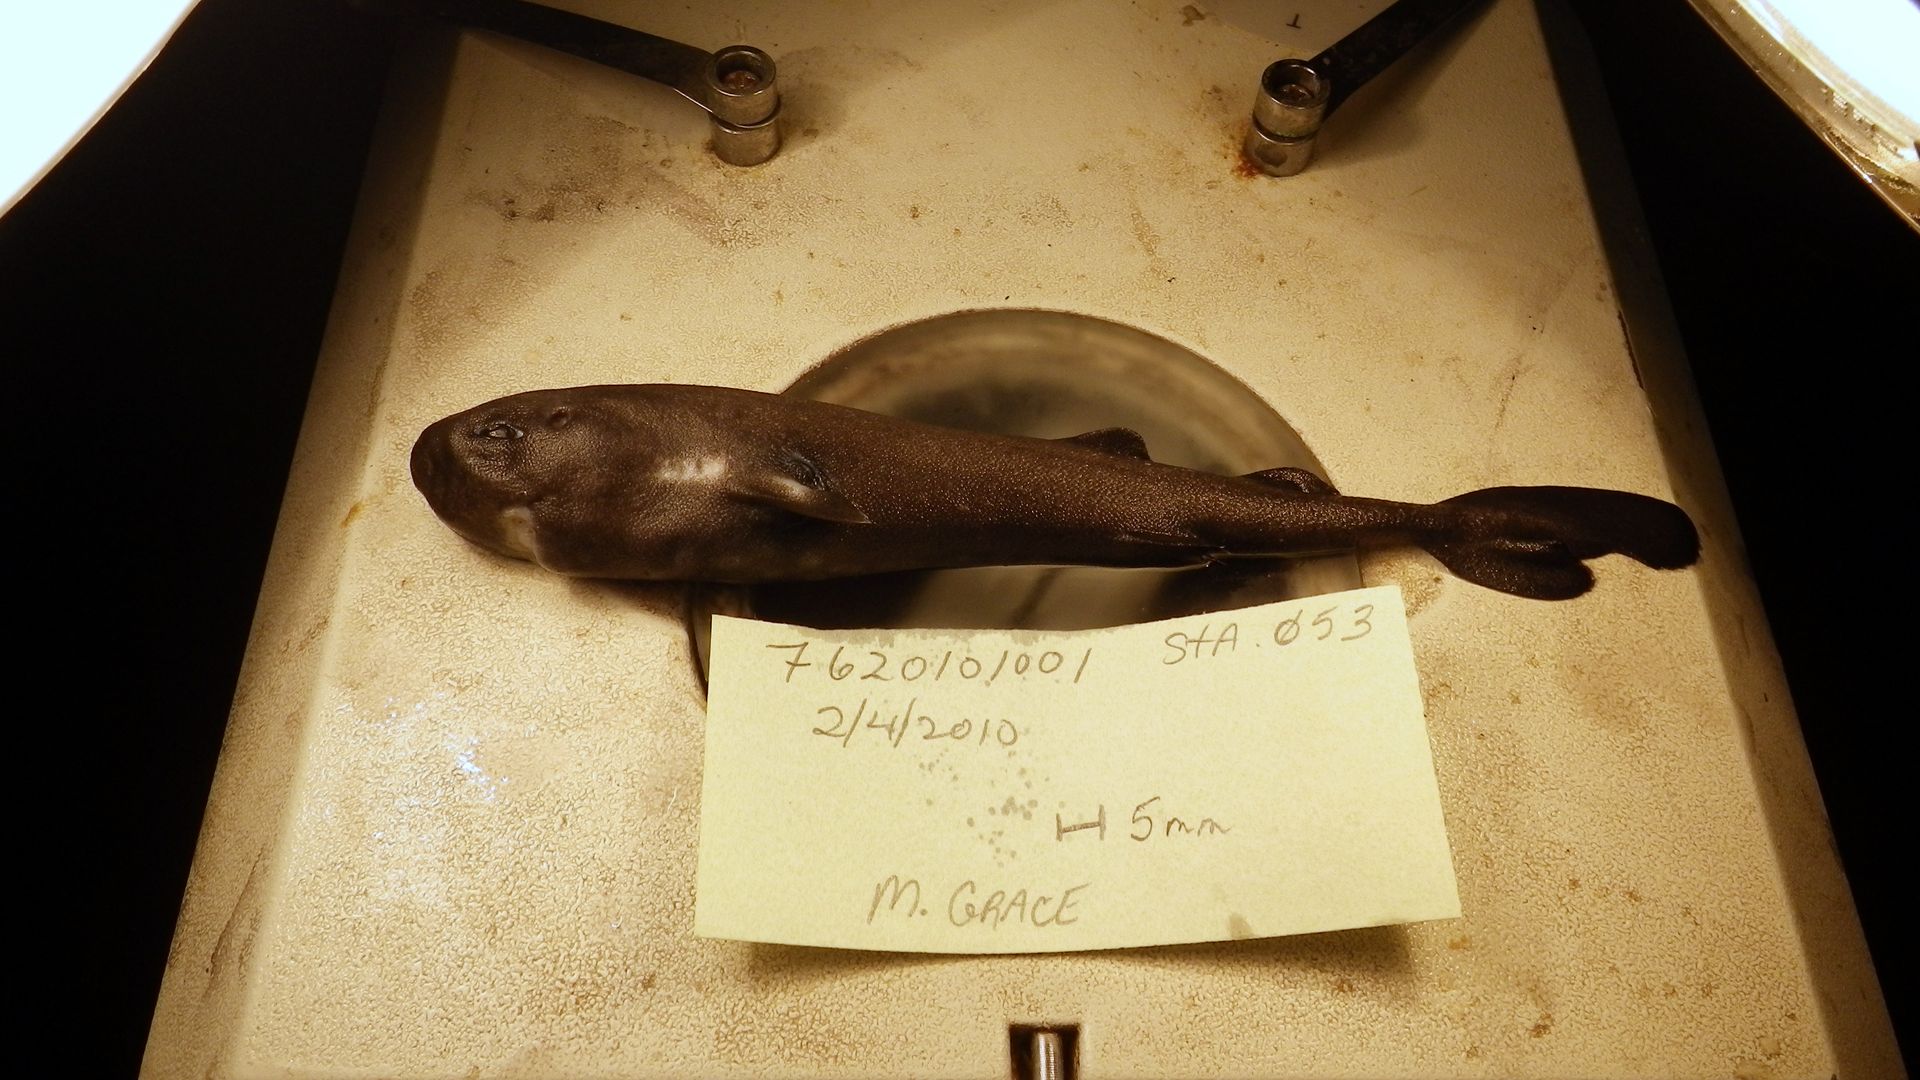 A 5.5-inch long rare pocket shark found in the Gulf of Mexico has turned out to be a new species and one that squirts little glowing clouds into the ocean.